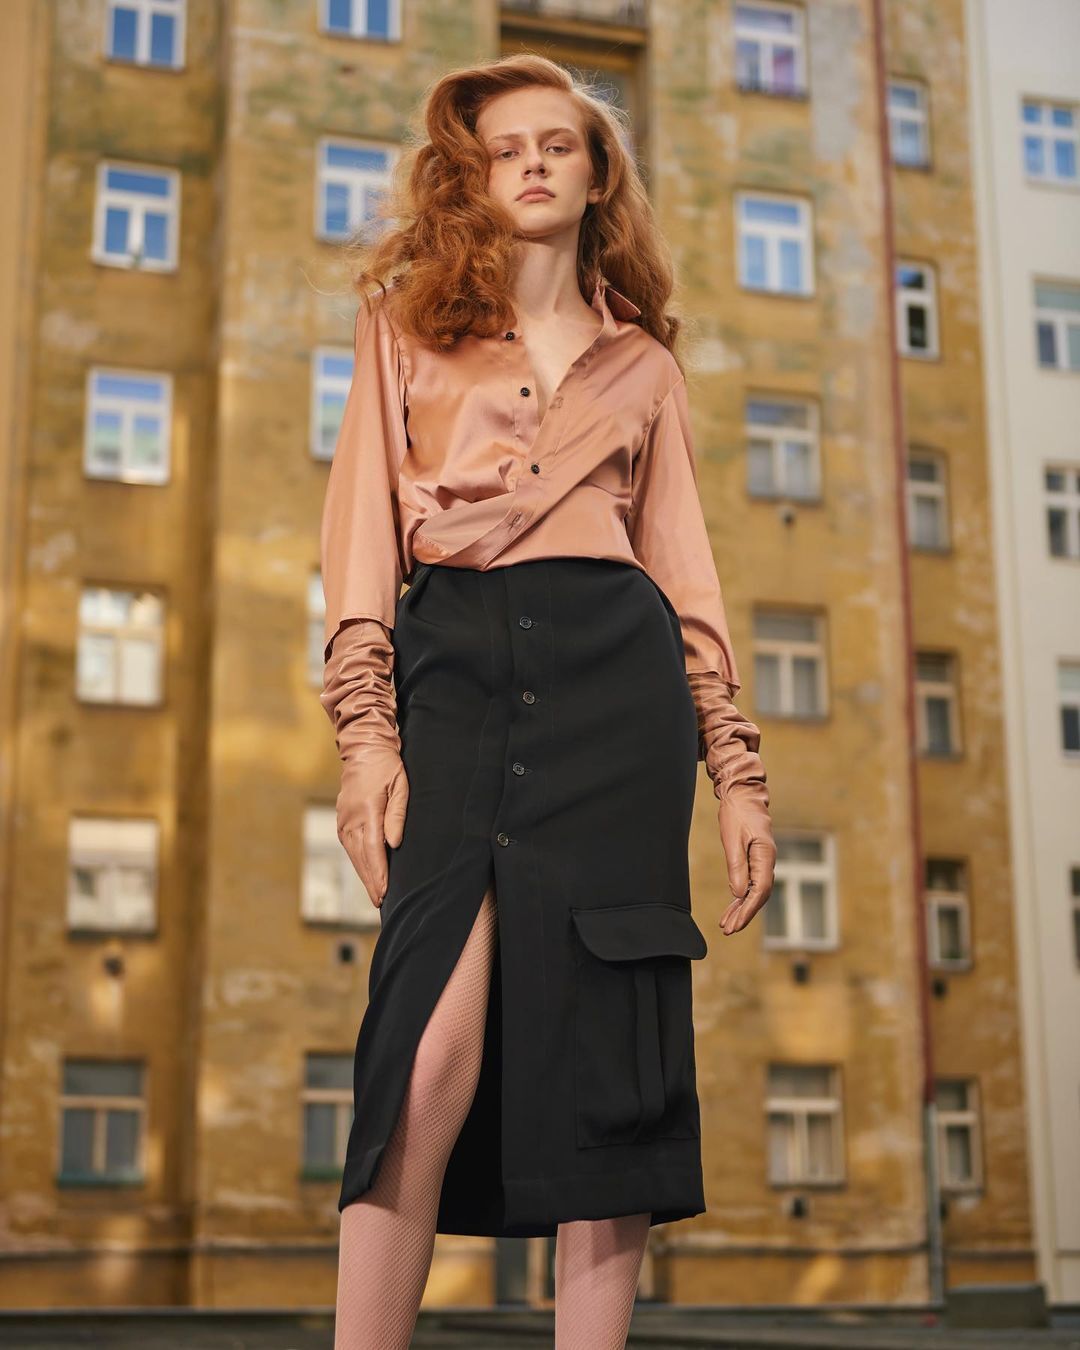 Bold leather, sleek silhouettes and more: 5 stylish skirt styles for fall 2023